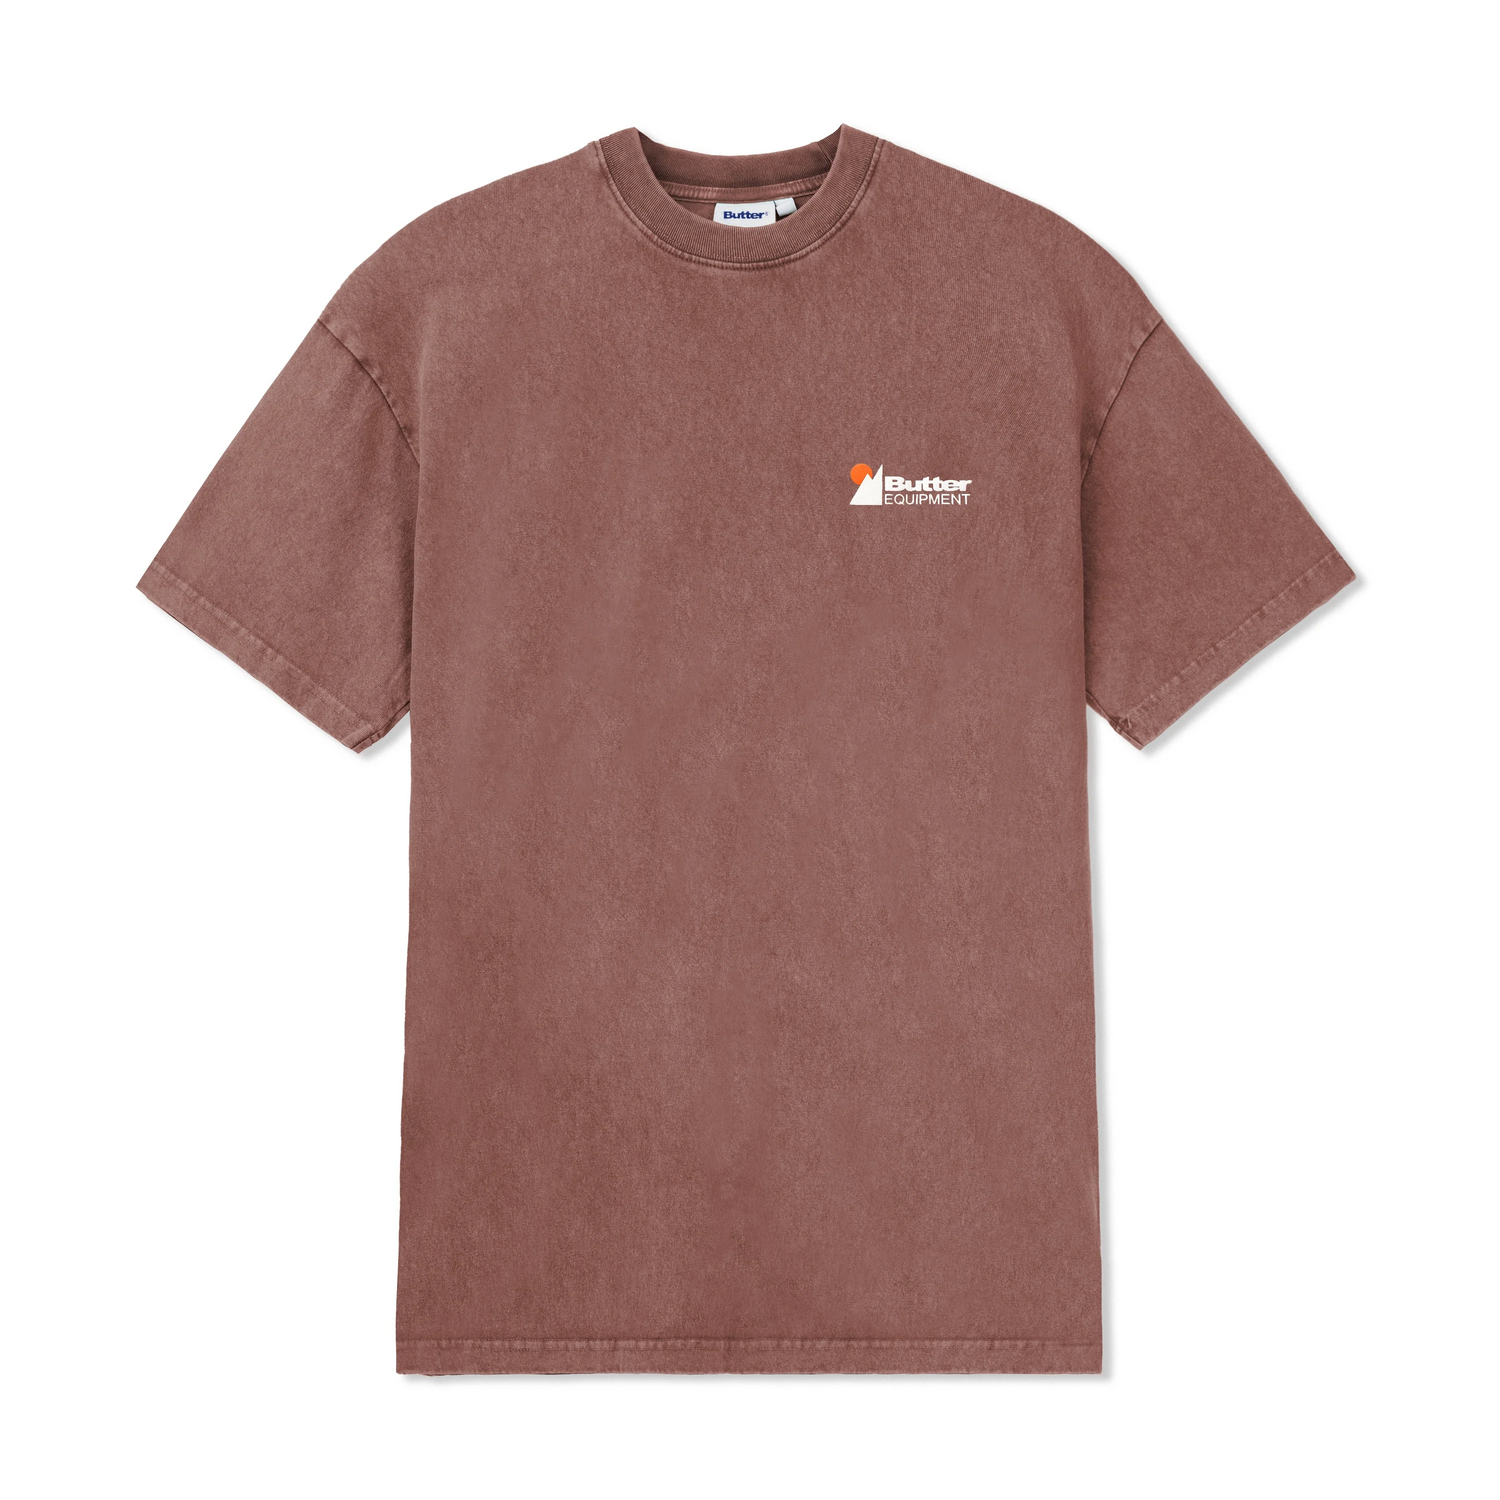 Distressed Pigment Dyed Tee, Rust